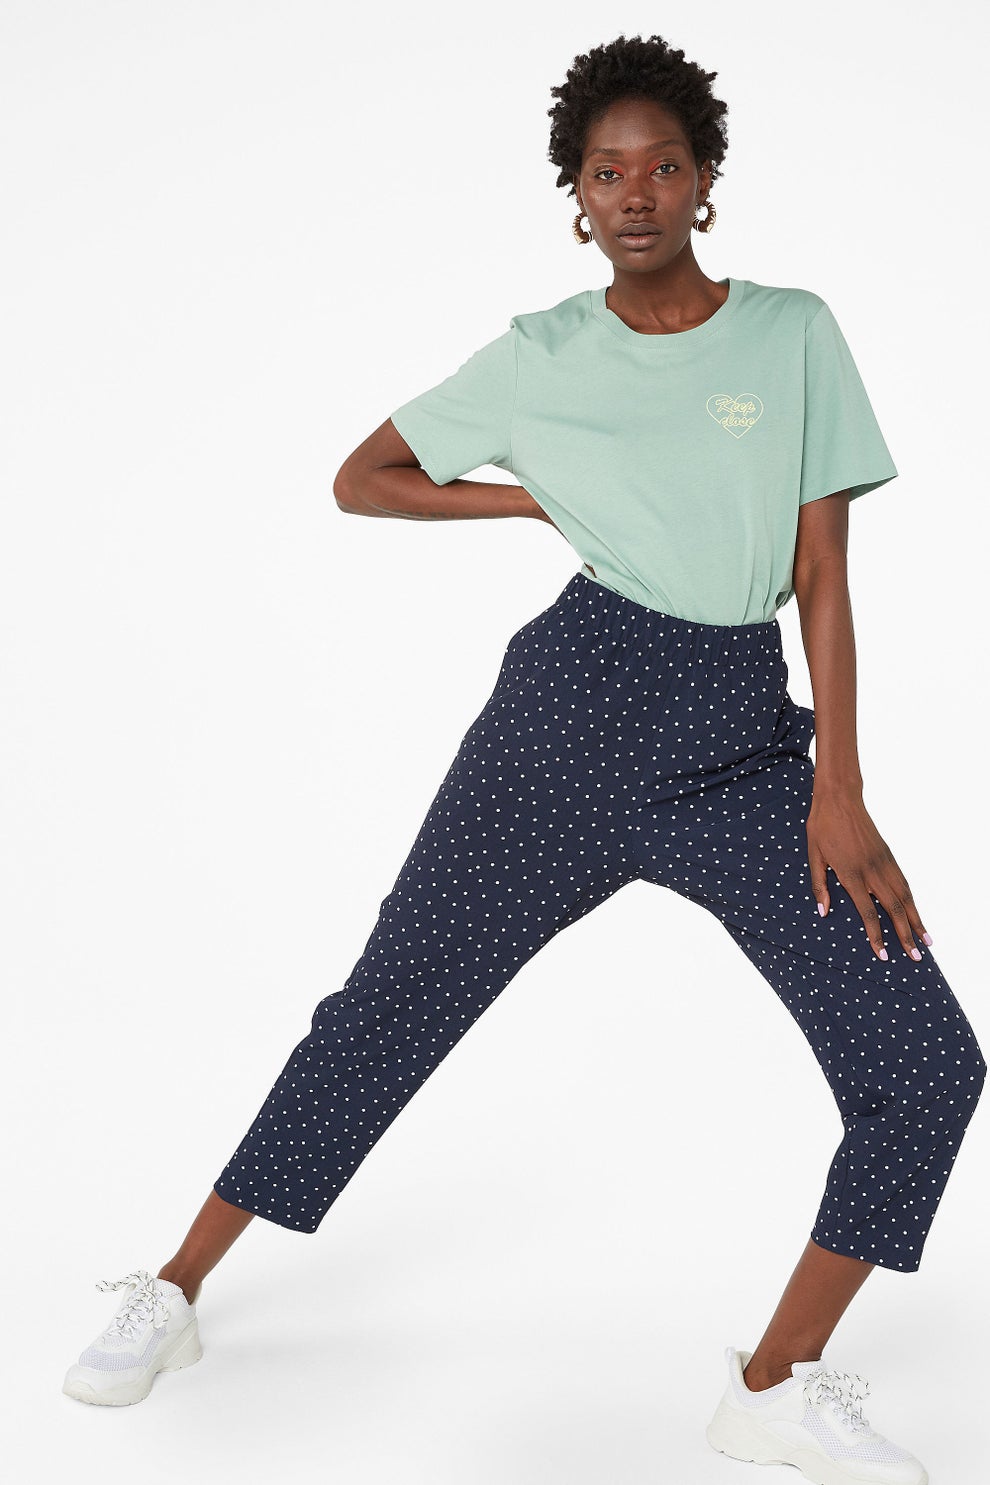 19 Comfy And Cute Work-From-Home Wardrobe Picks From Monki